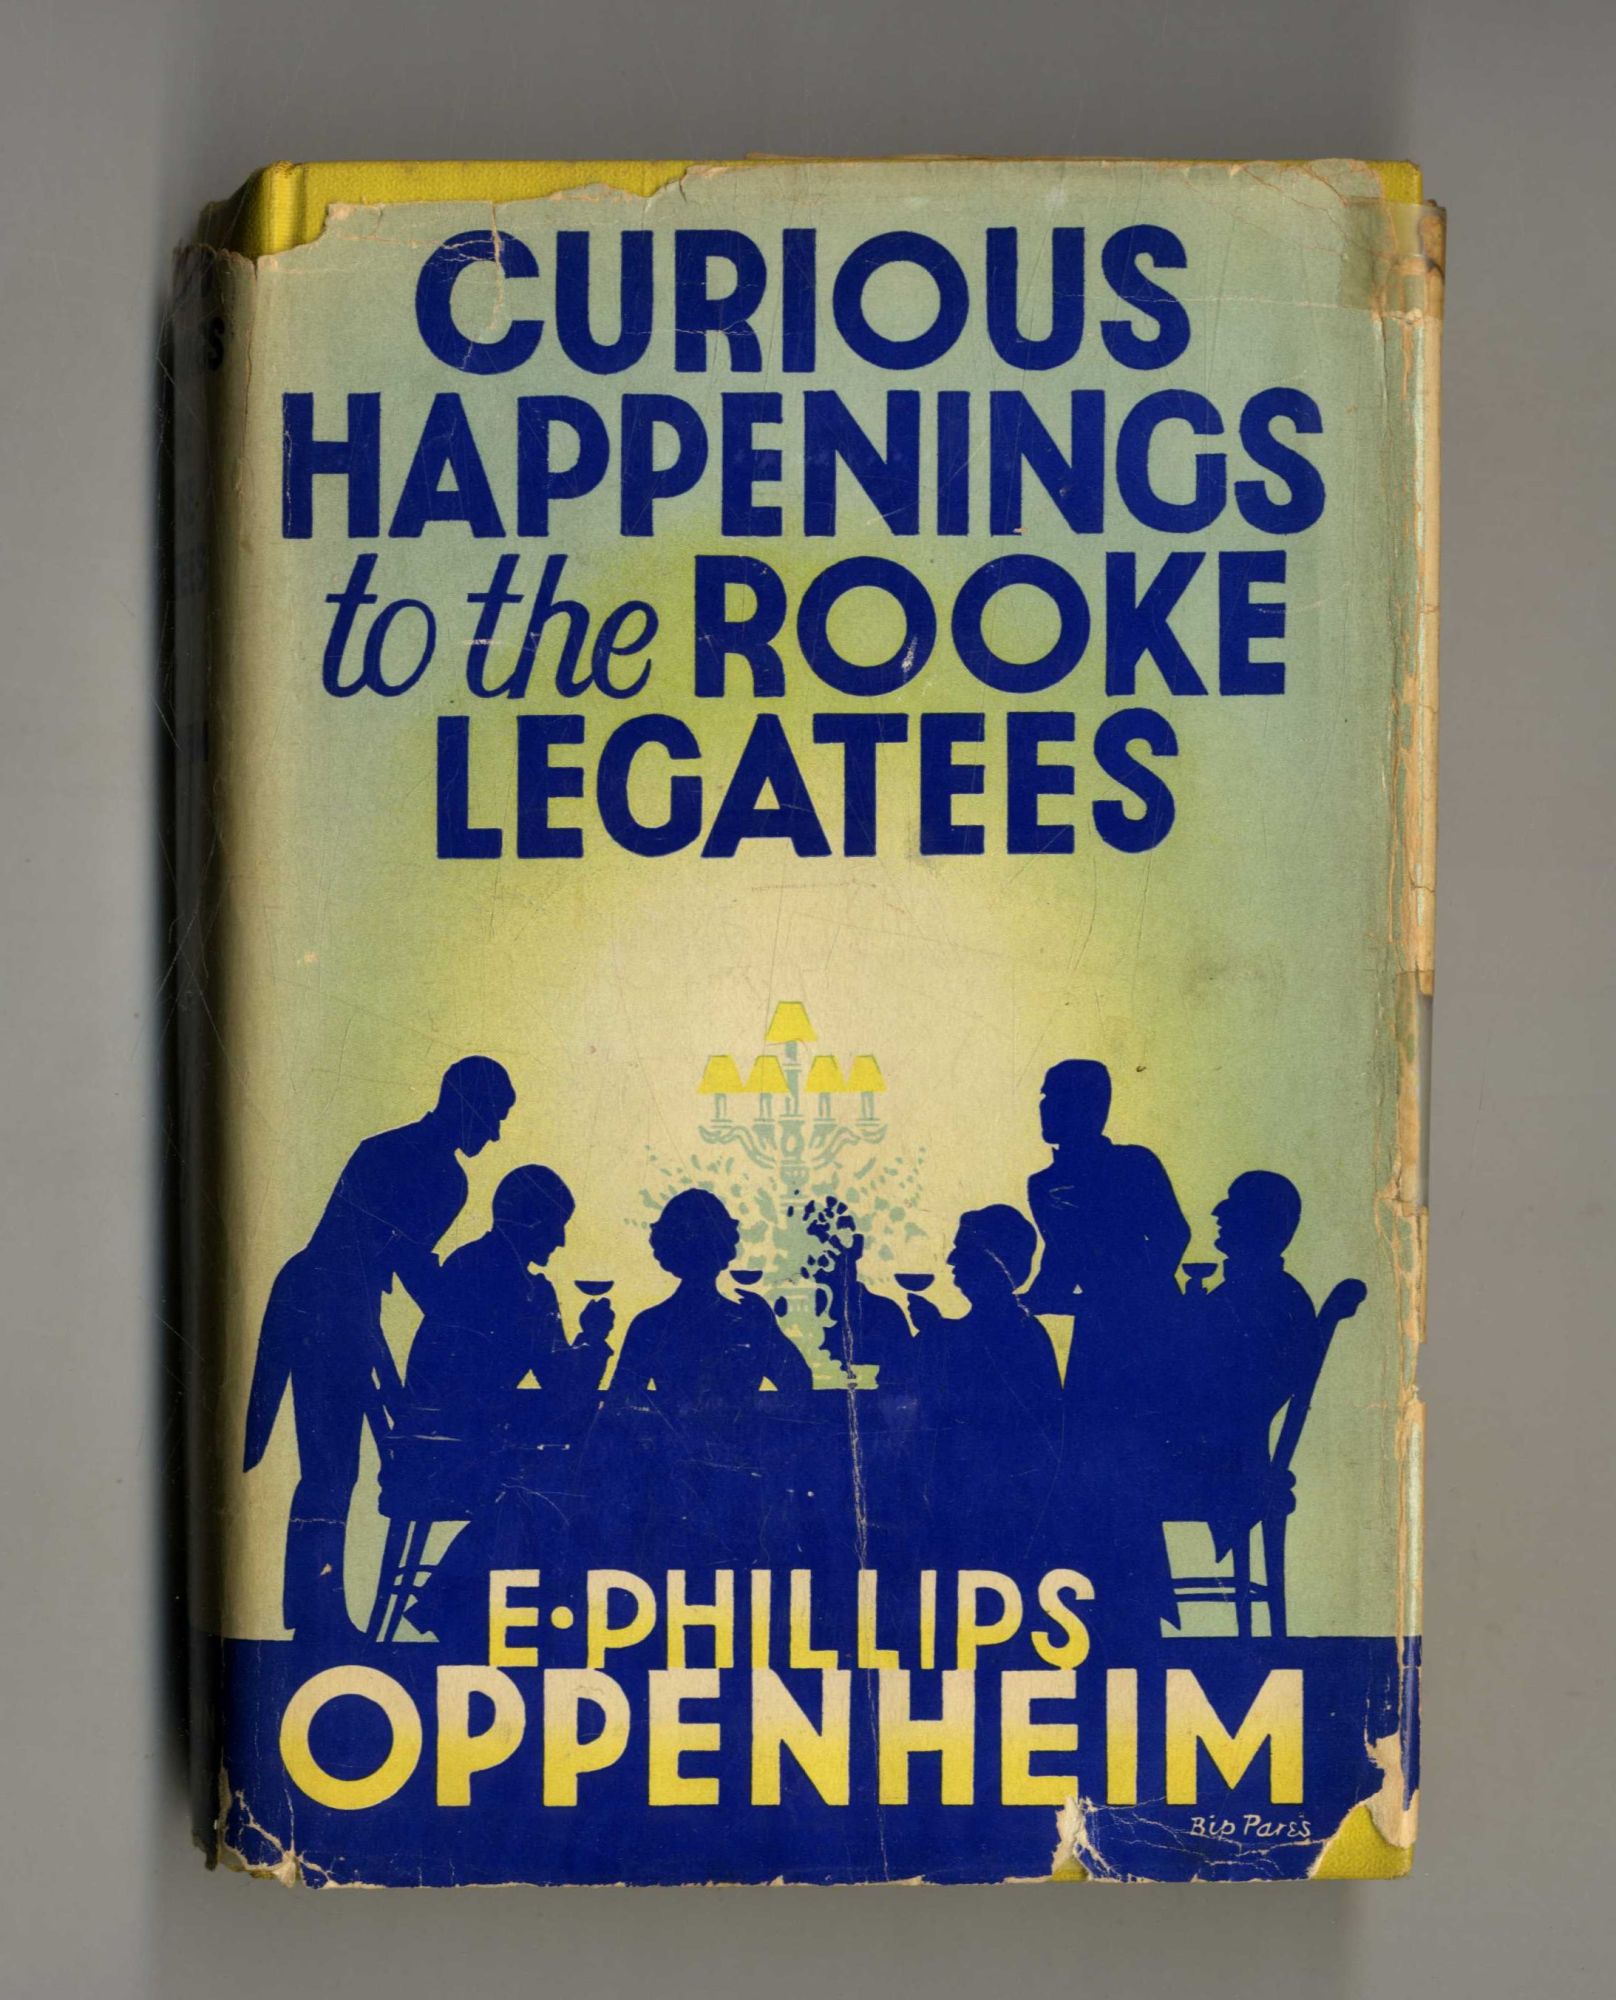 Book #160289 Curious Happenings to the Rooke Legatees 1st Edition/1st Printing. E. Phillips Oppenheim.